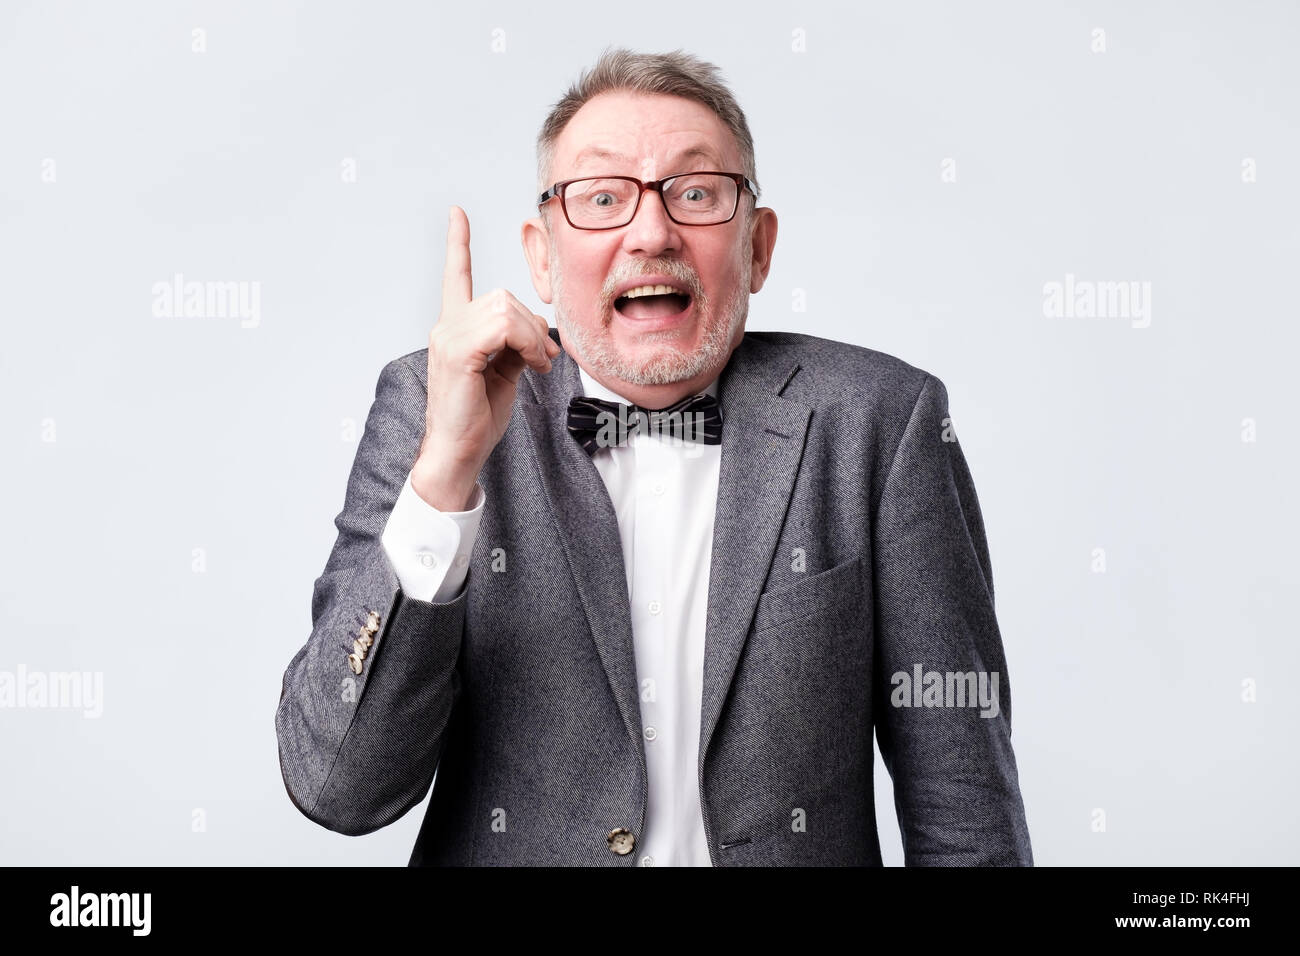 Happy senior man showing index fingers up, giving advice or recommendation Stock Photo